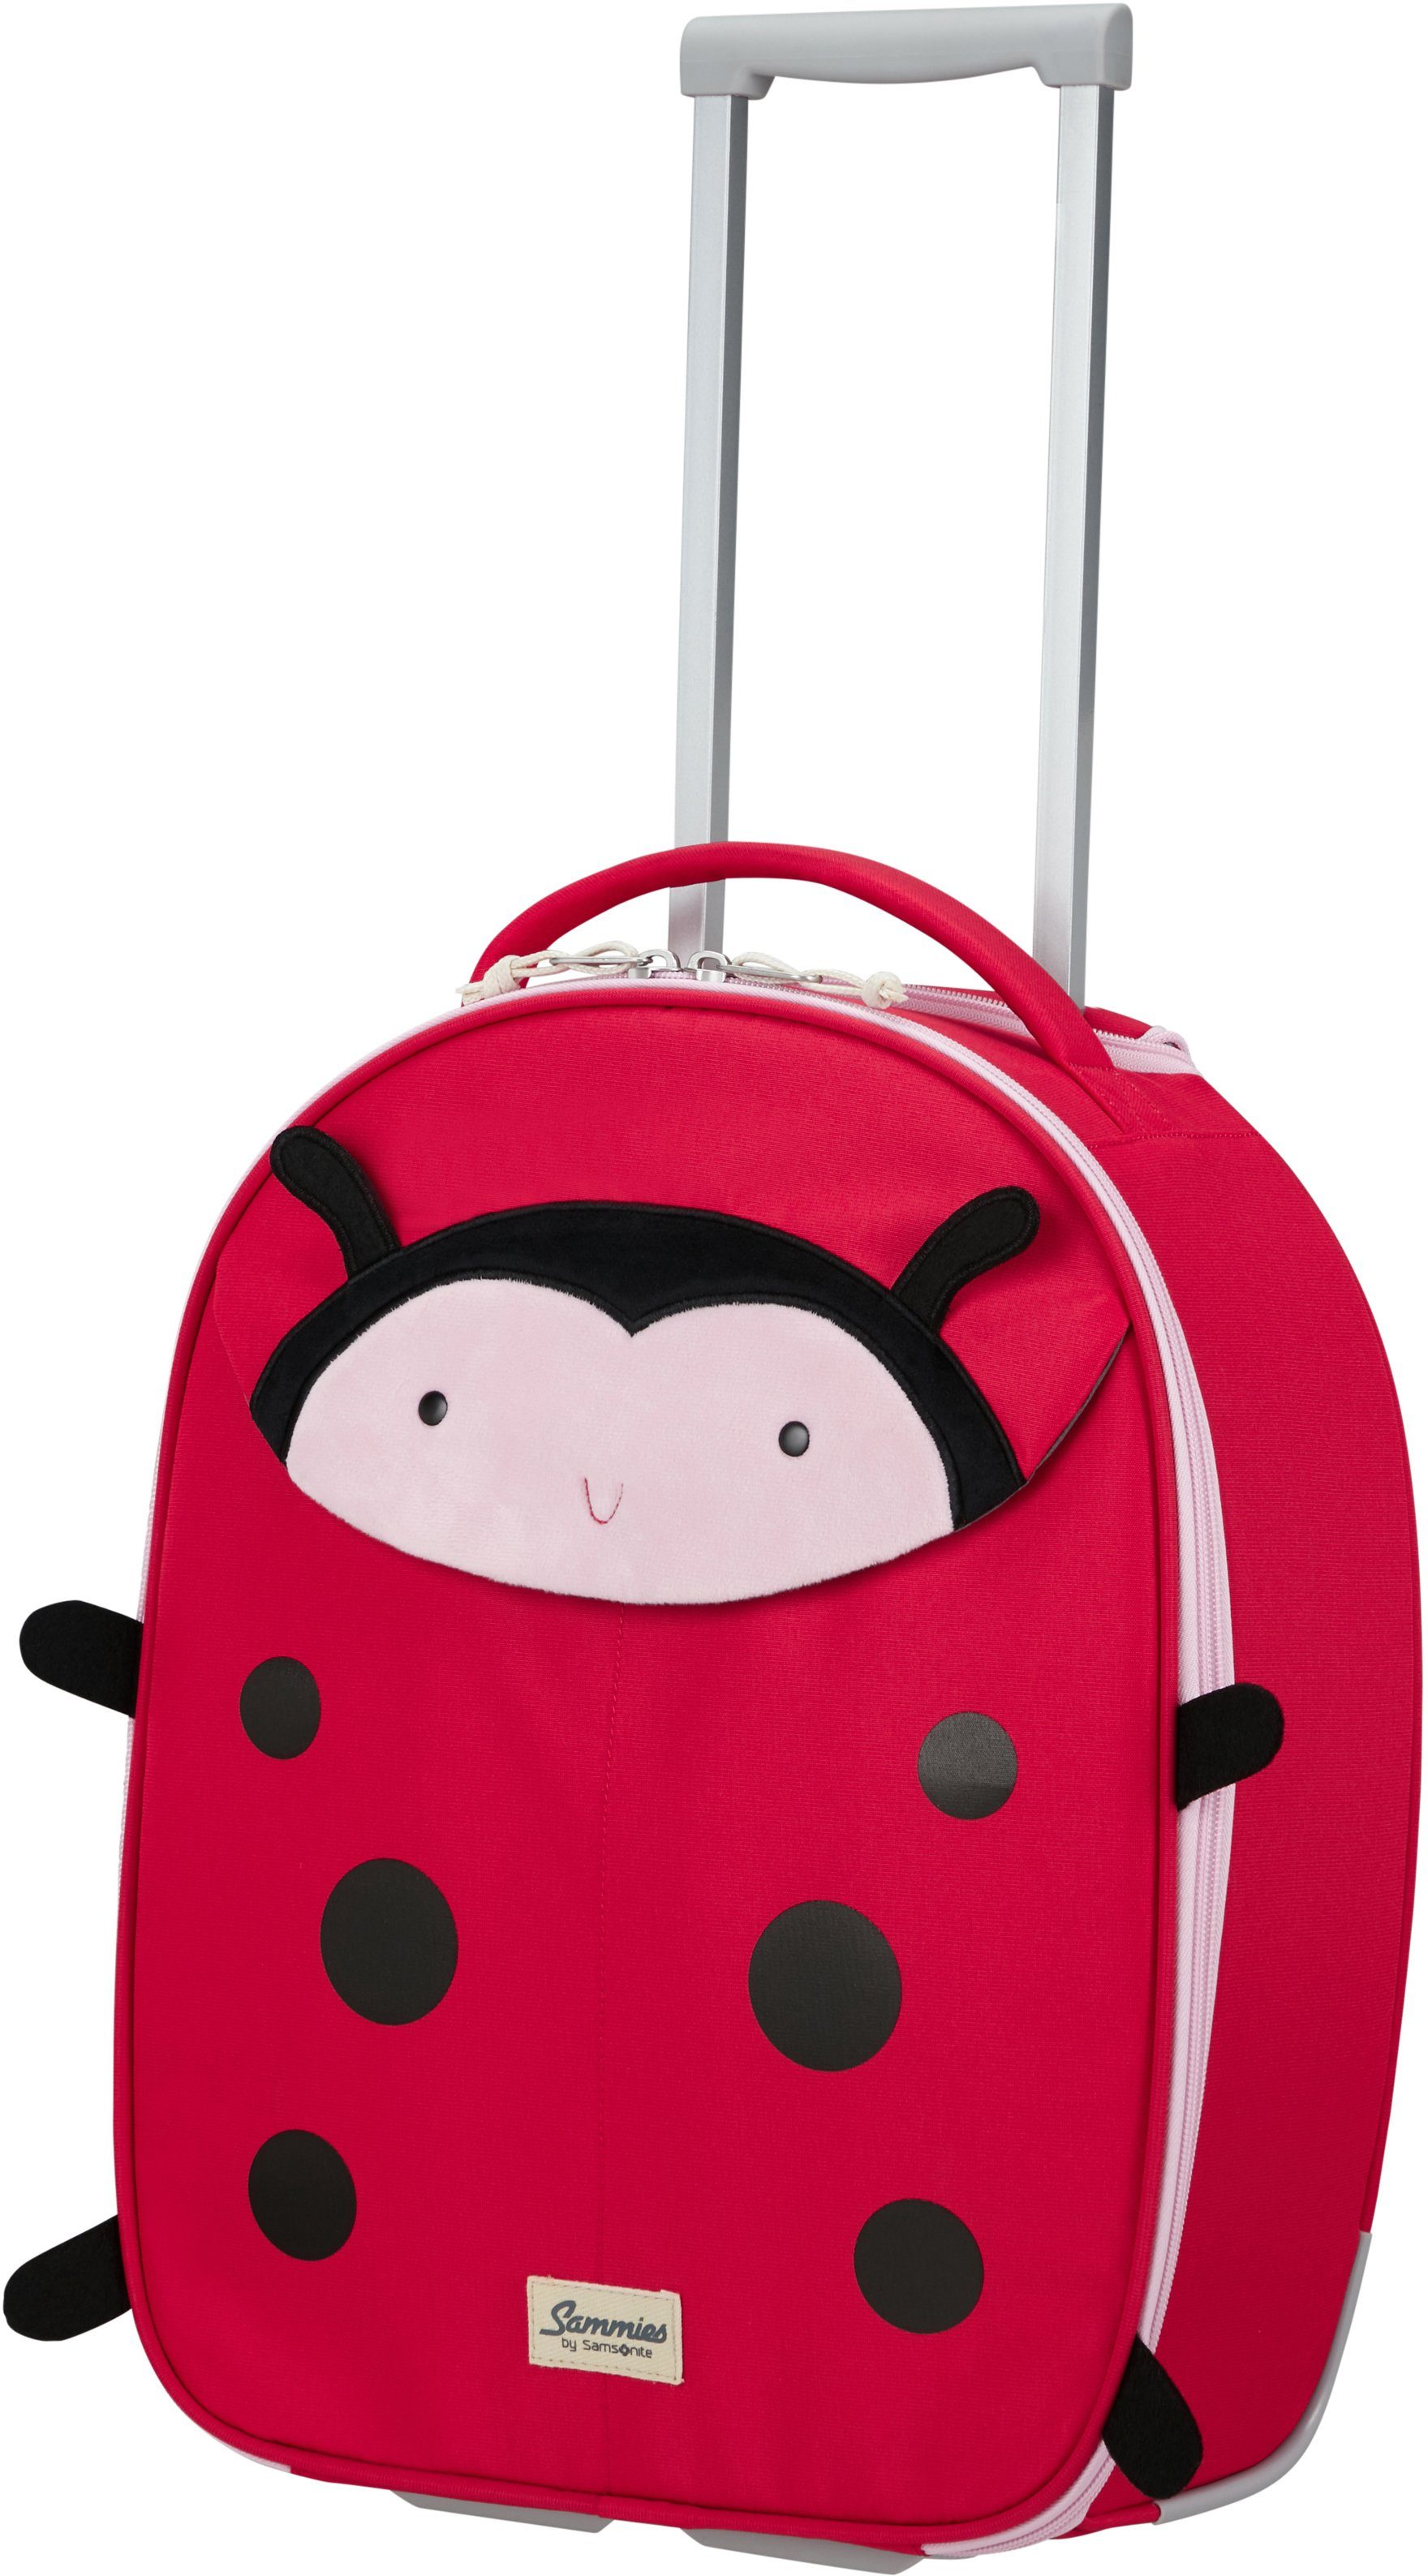 Sammies Ladybug recyceltem ECO, Kinderkoffer 2 Rollen, Material Happy Lally, aus Samsonite